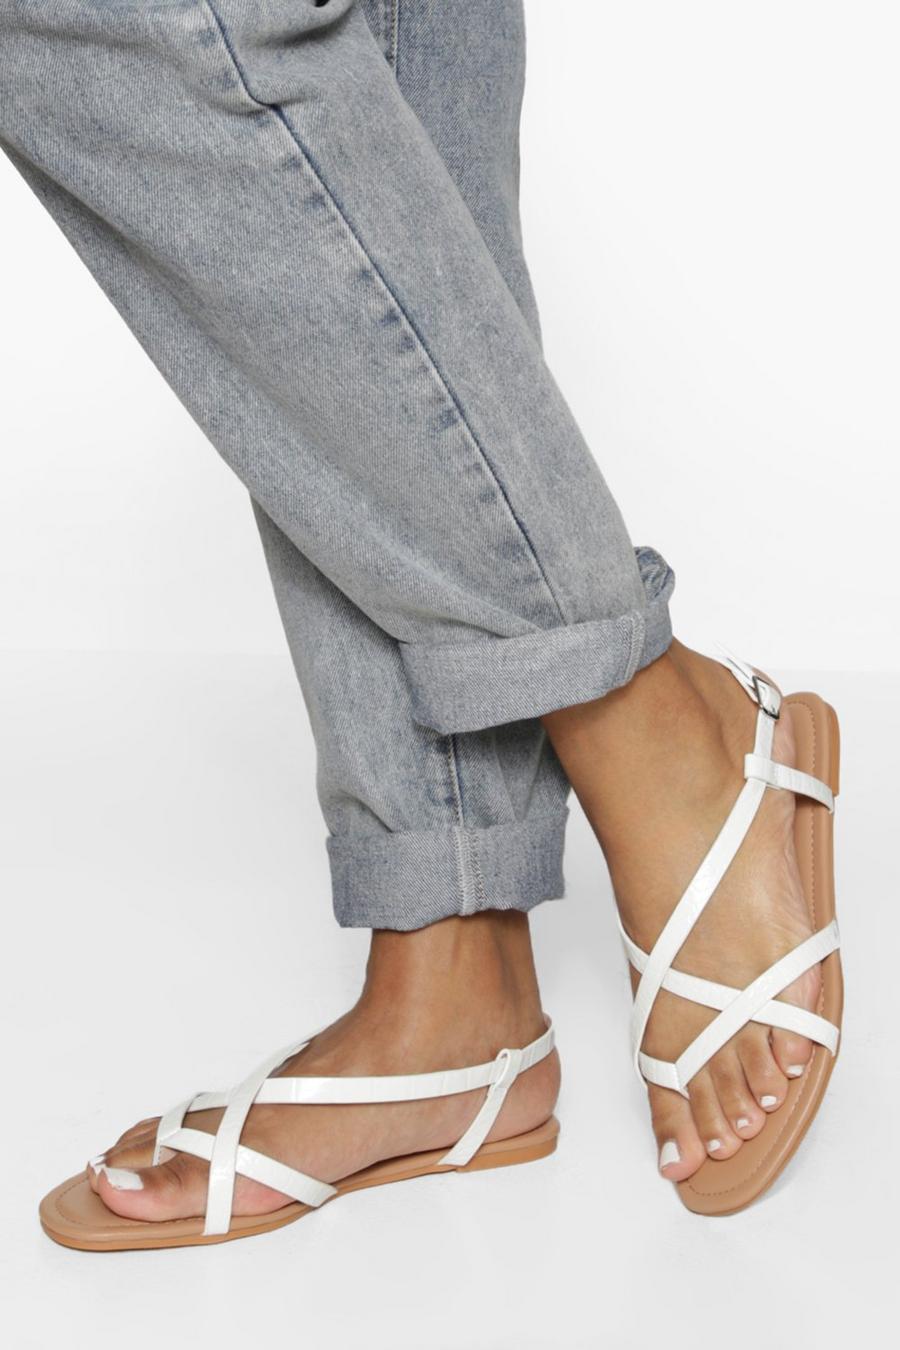 White Wide Fit Croc Toe Post Basic Strappy Sandal image number 1